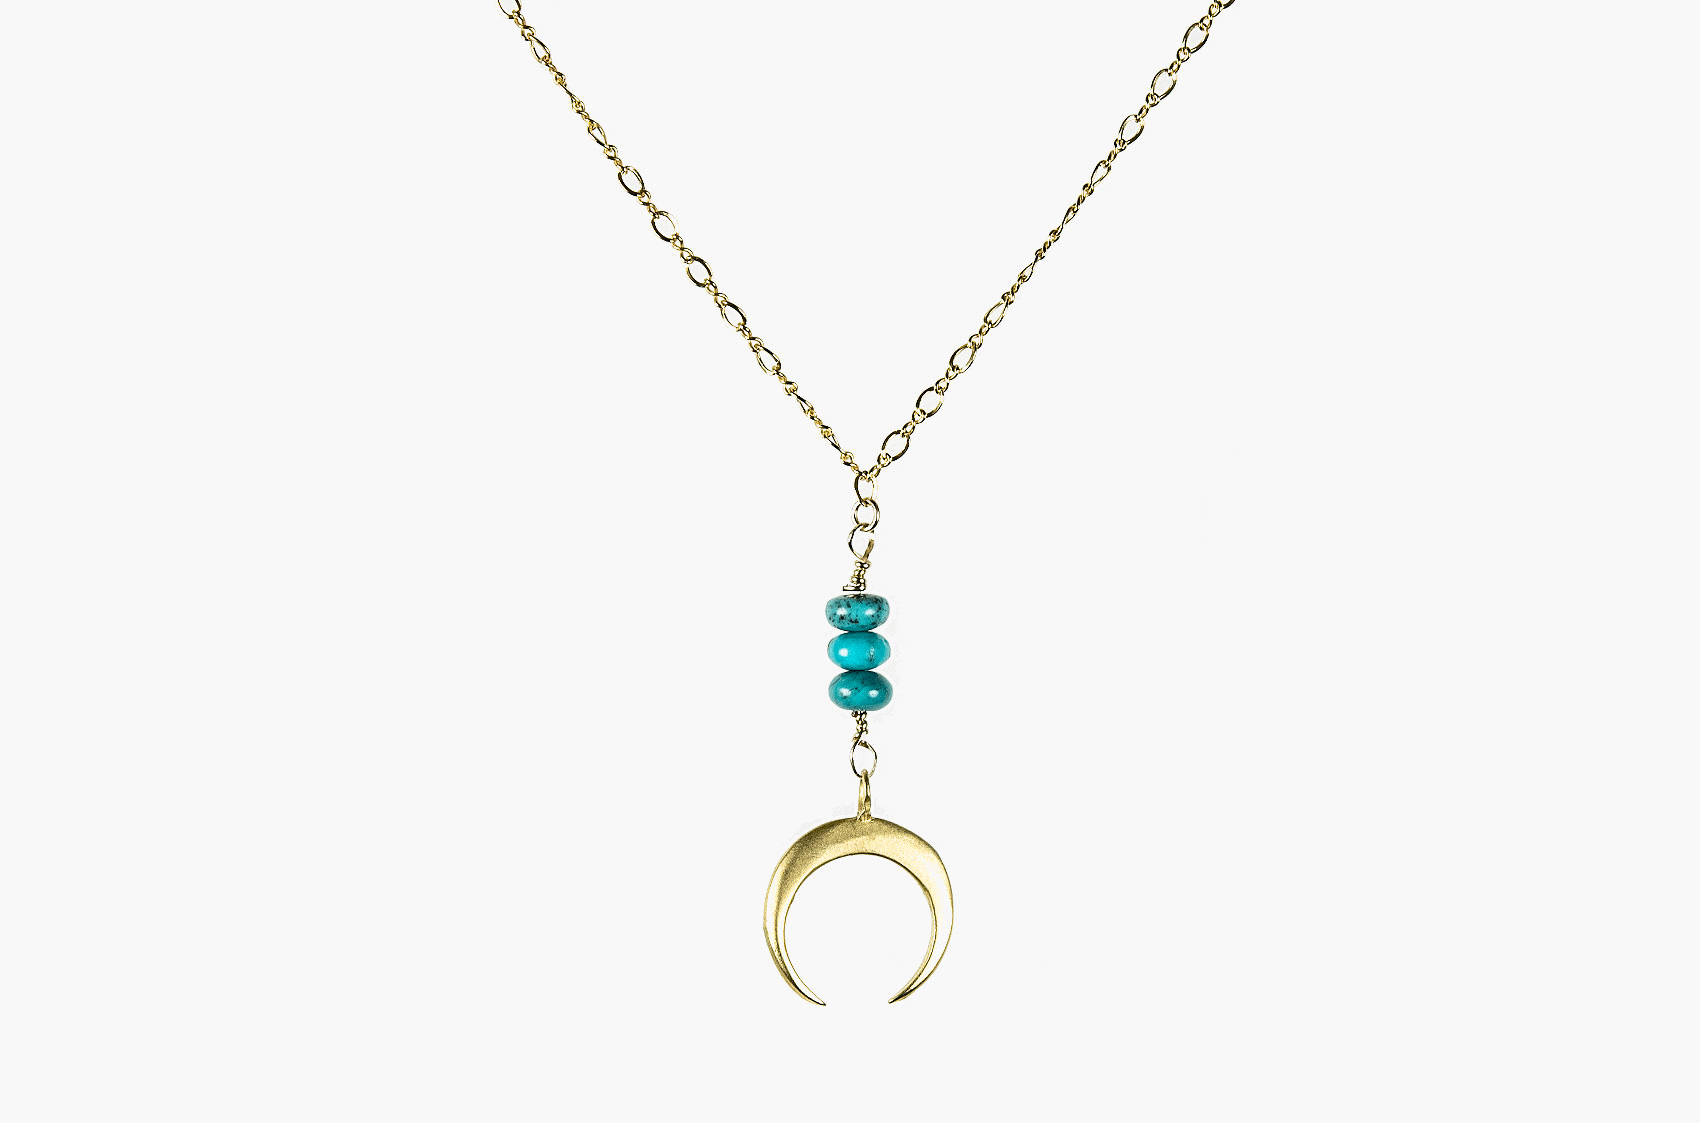 Metal & Stone. Turquoise and precious metal crescent